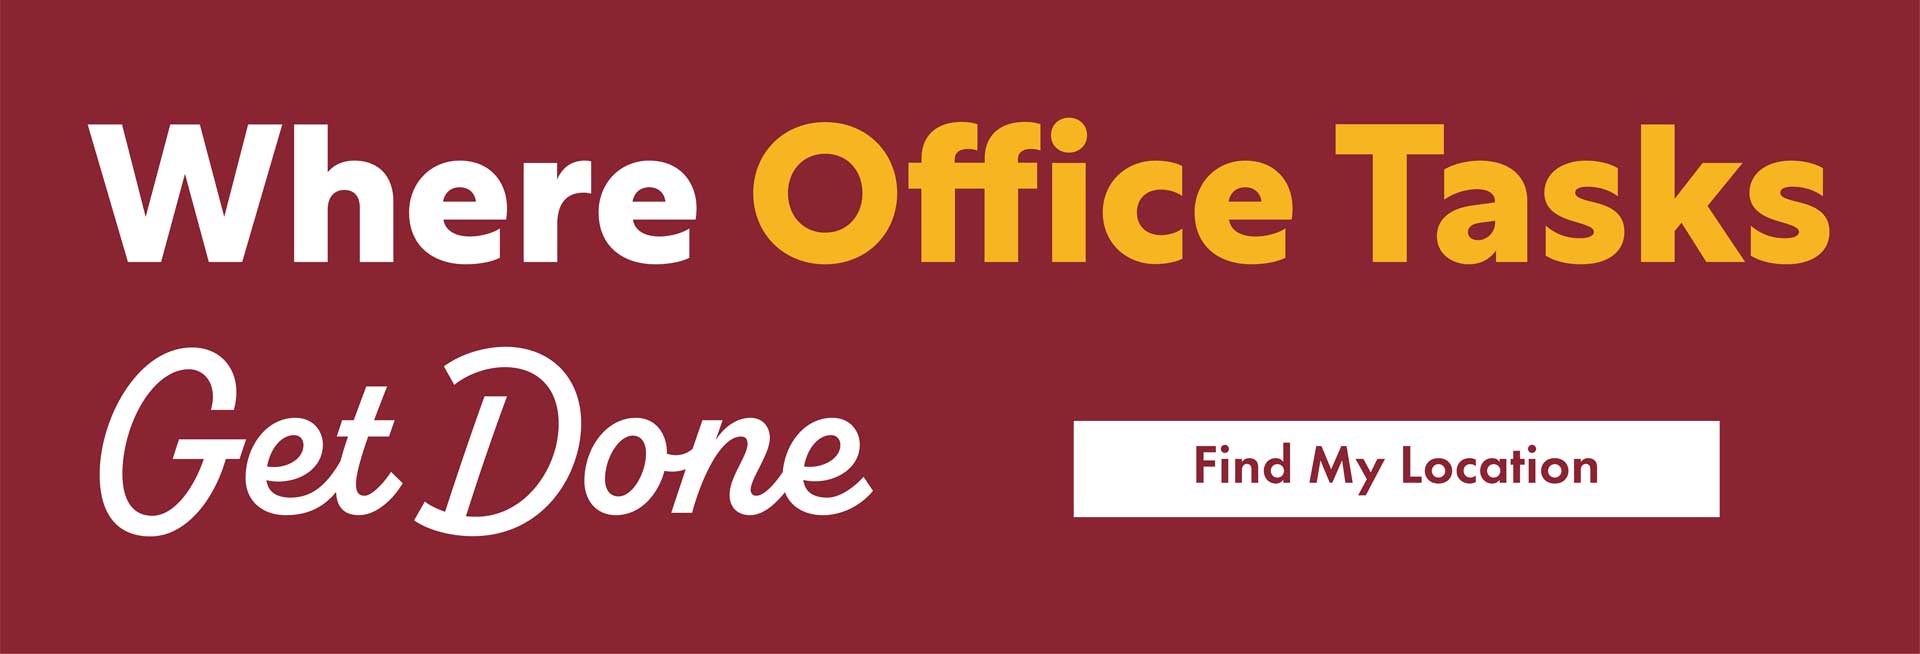 Where Office Tasks Get Done - Find My Location